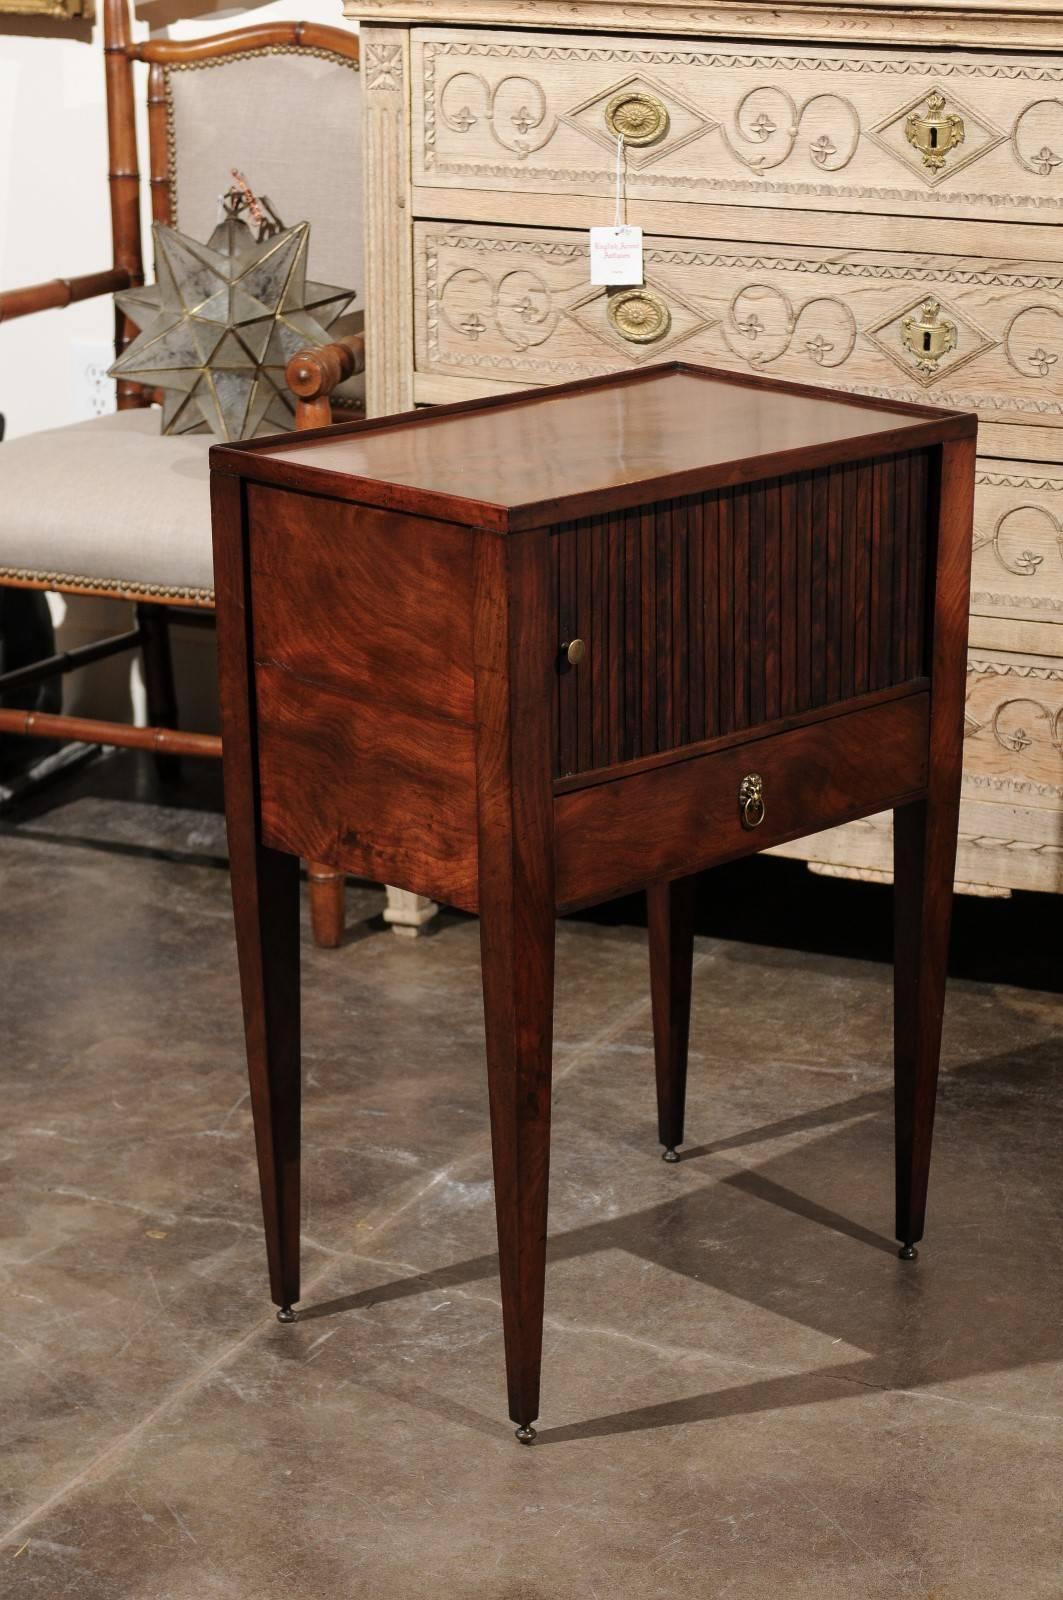 An English wooden side table with tambour door and single drawer from the late 19th century. This English side table features a rectangular tray-top over a sliding tambour door, revealing a small storage area, perfect to place books and small